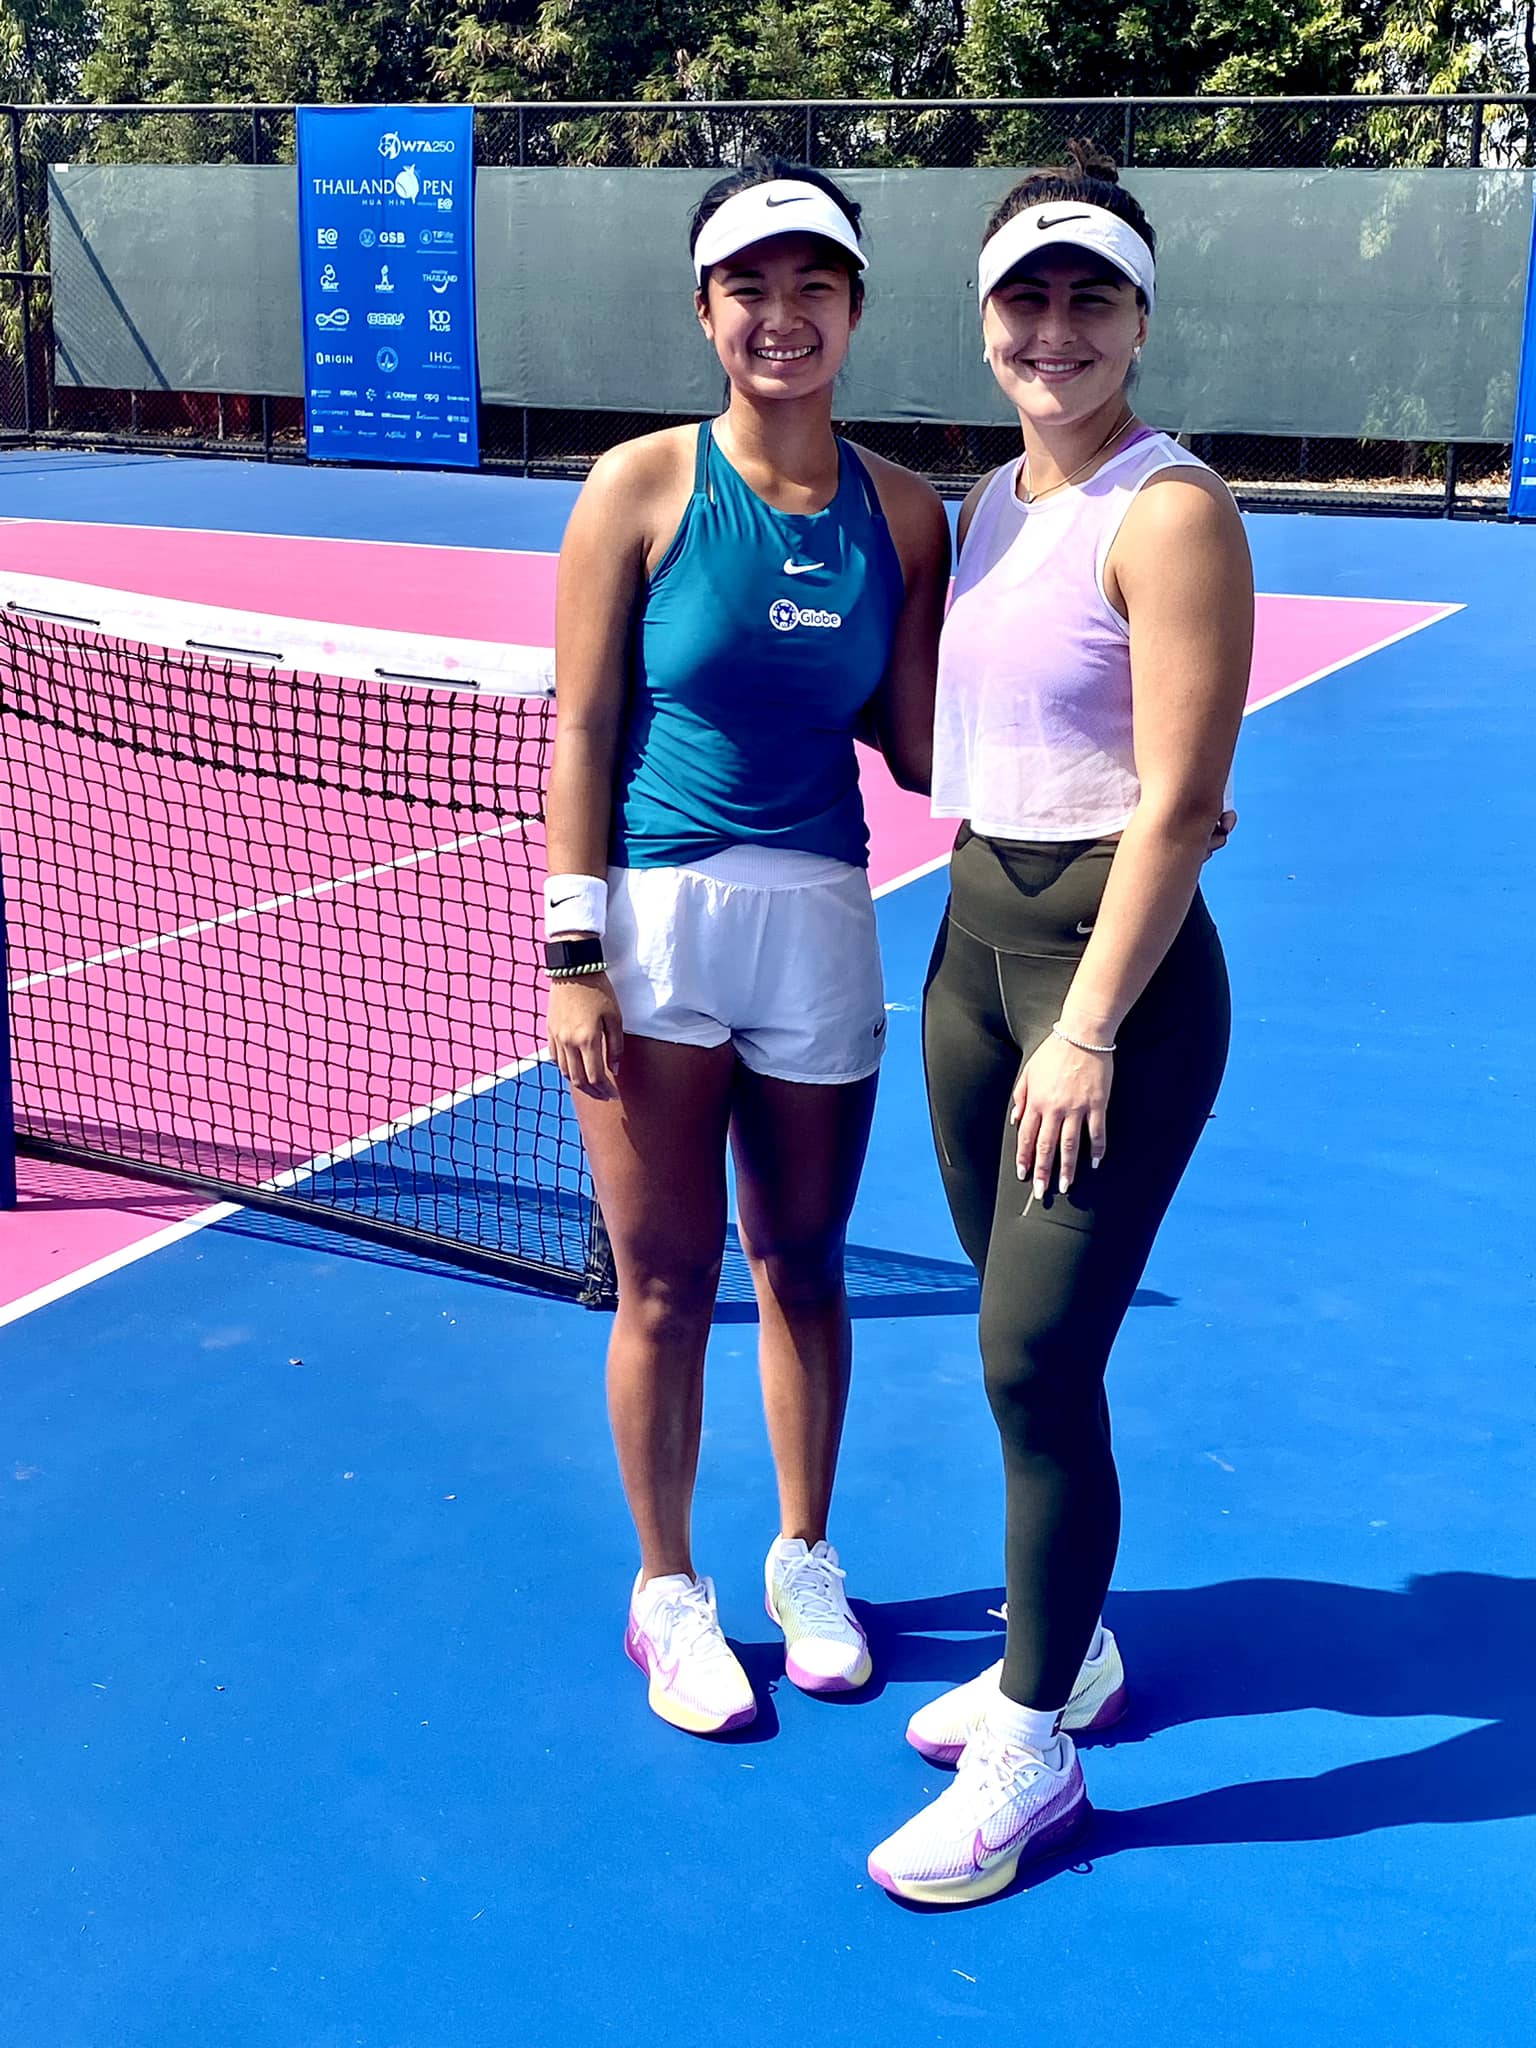 Alex Eala and Canadia pro player Bianca Andreescu during a practice session in Thailand. –Alex Eala Facebook